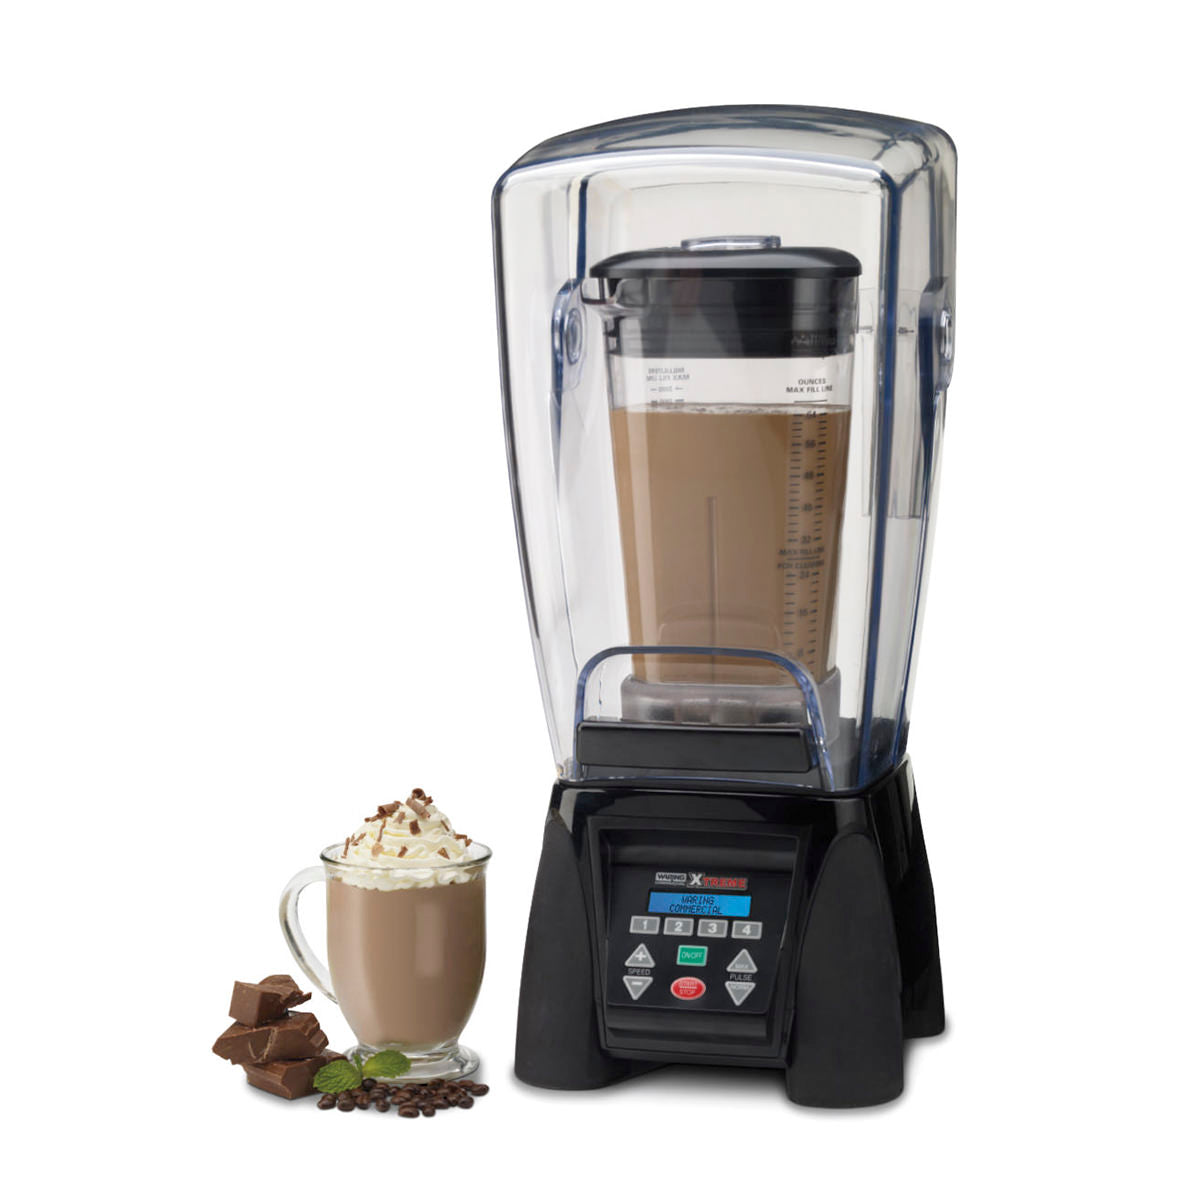 MX1500XTX Heavy-Duty Reprogrammable Blender with Sound Enclosure & "The Raptor" 64 oz Copolyester Jar by Waring Commercial